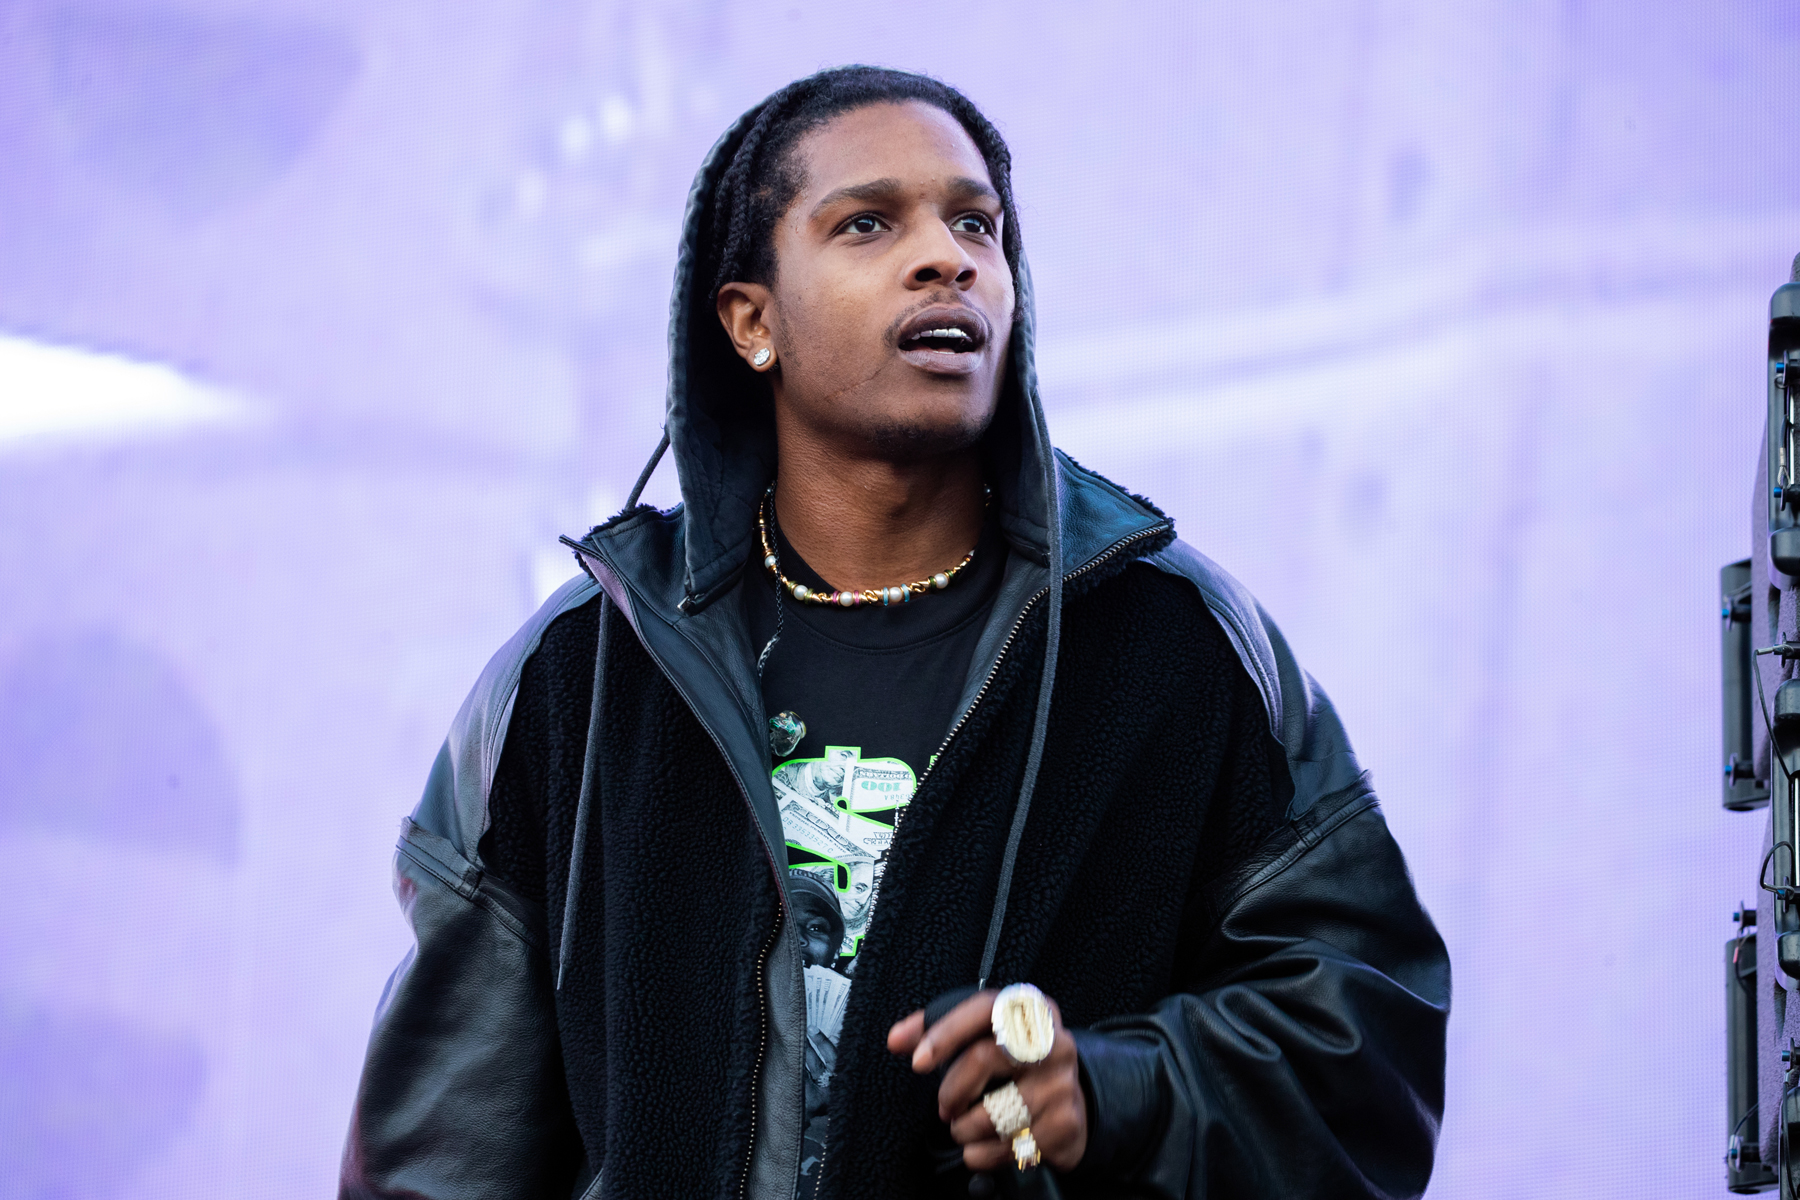 Two Counts Of Assault On A$AP Rocky During LA Shooting